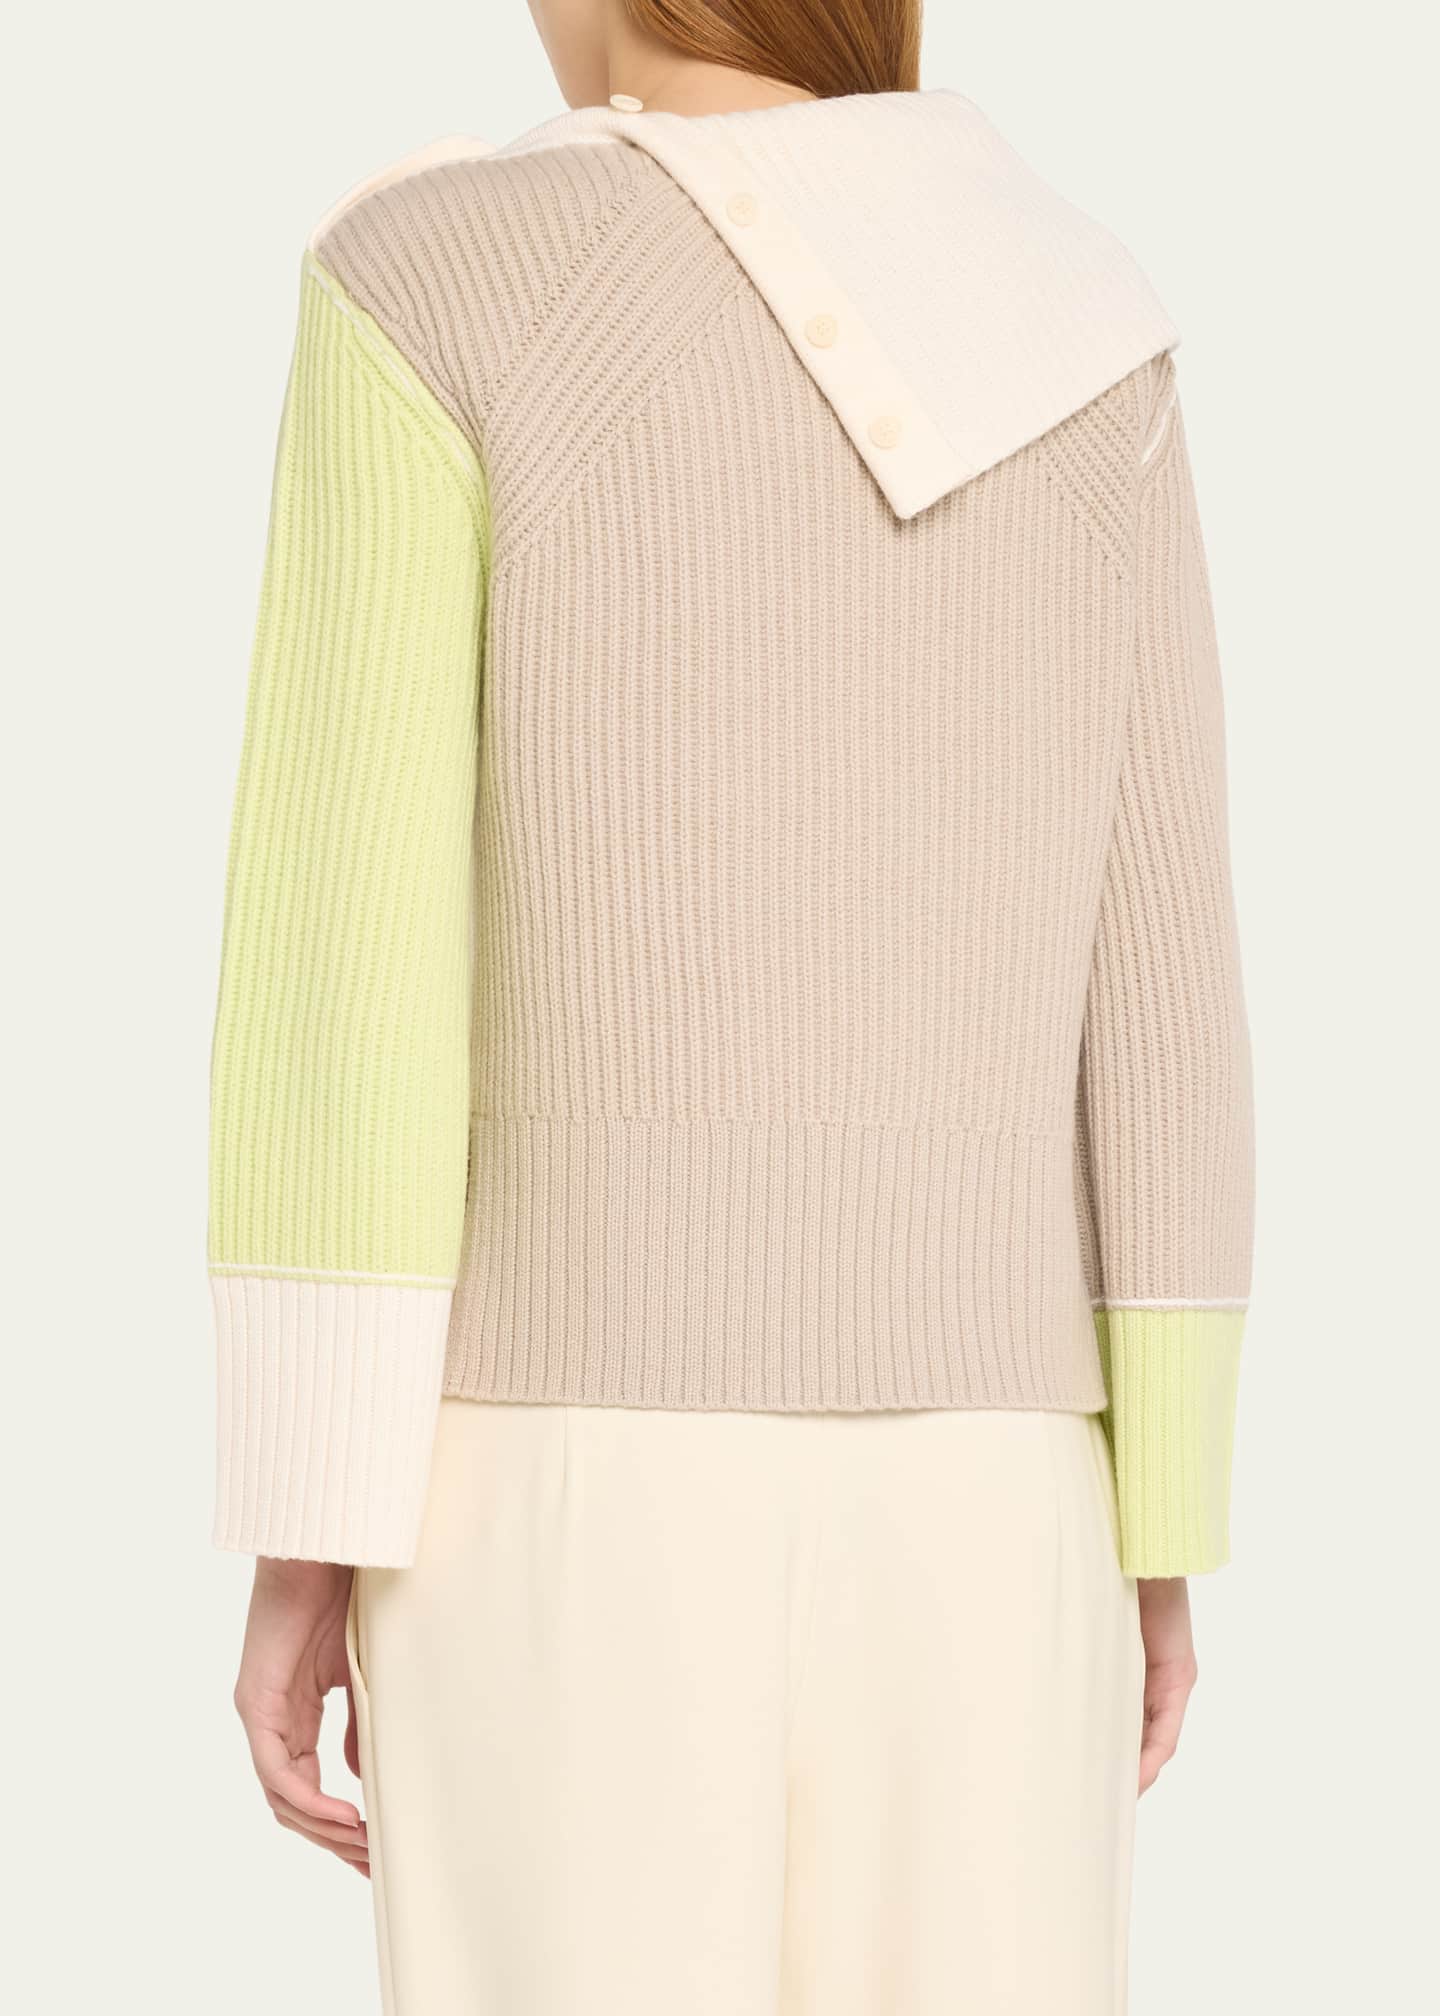 SIMKHAI Flores Colorblock Wool and Cashmere Sweater - Bergdorf Goodman